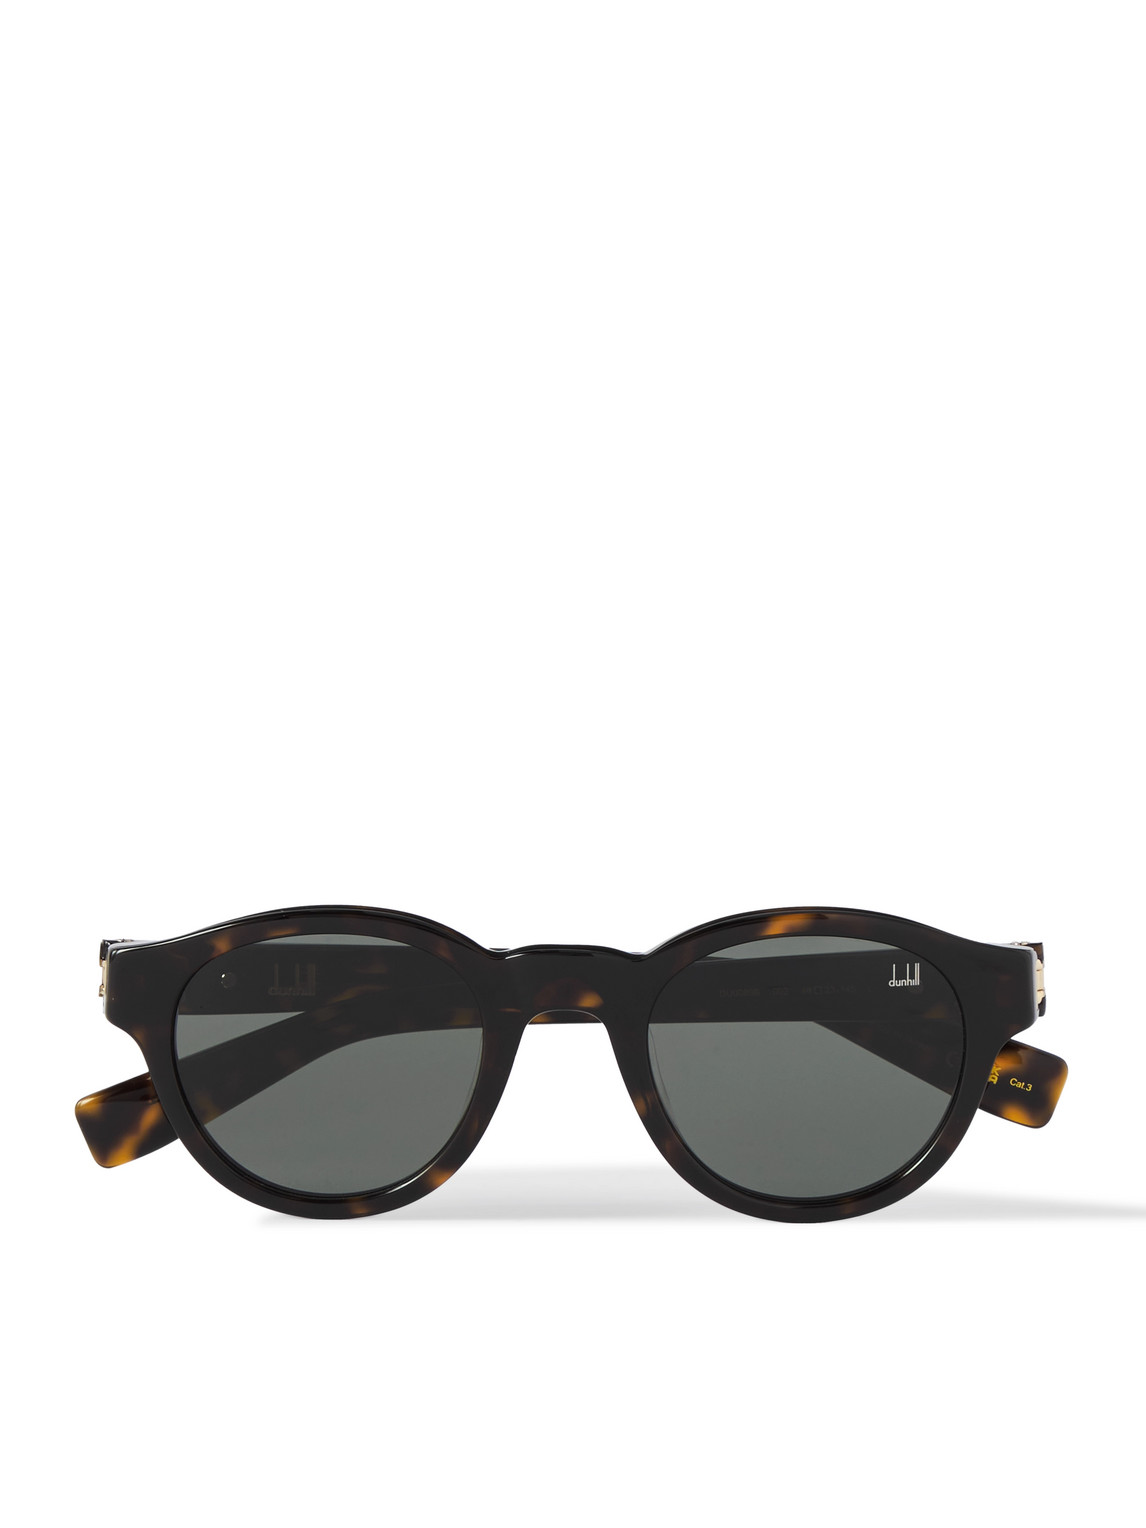 Dunhill Round-frame Tortoiseshell Acetate Sunglasses In Brown